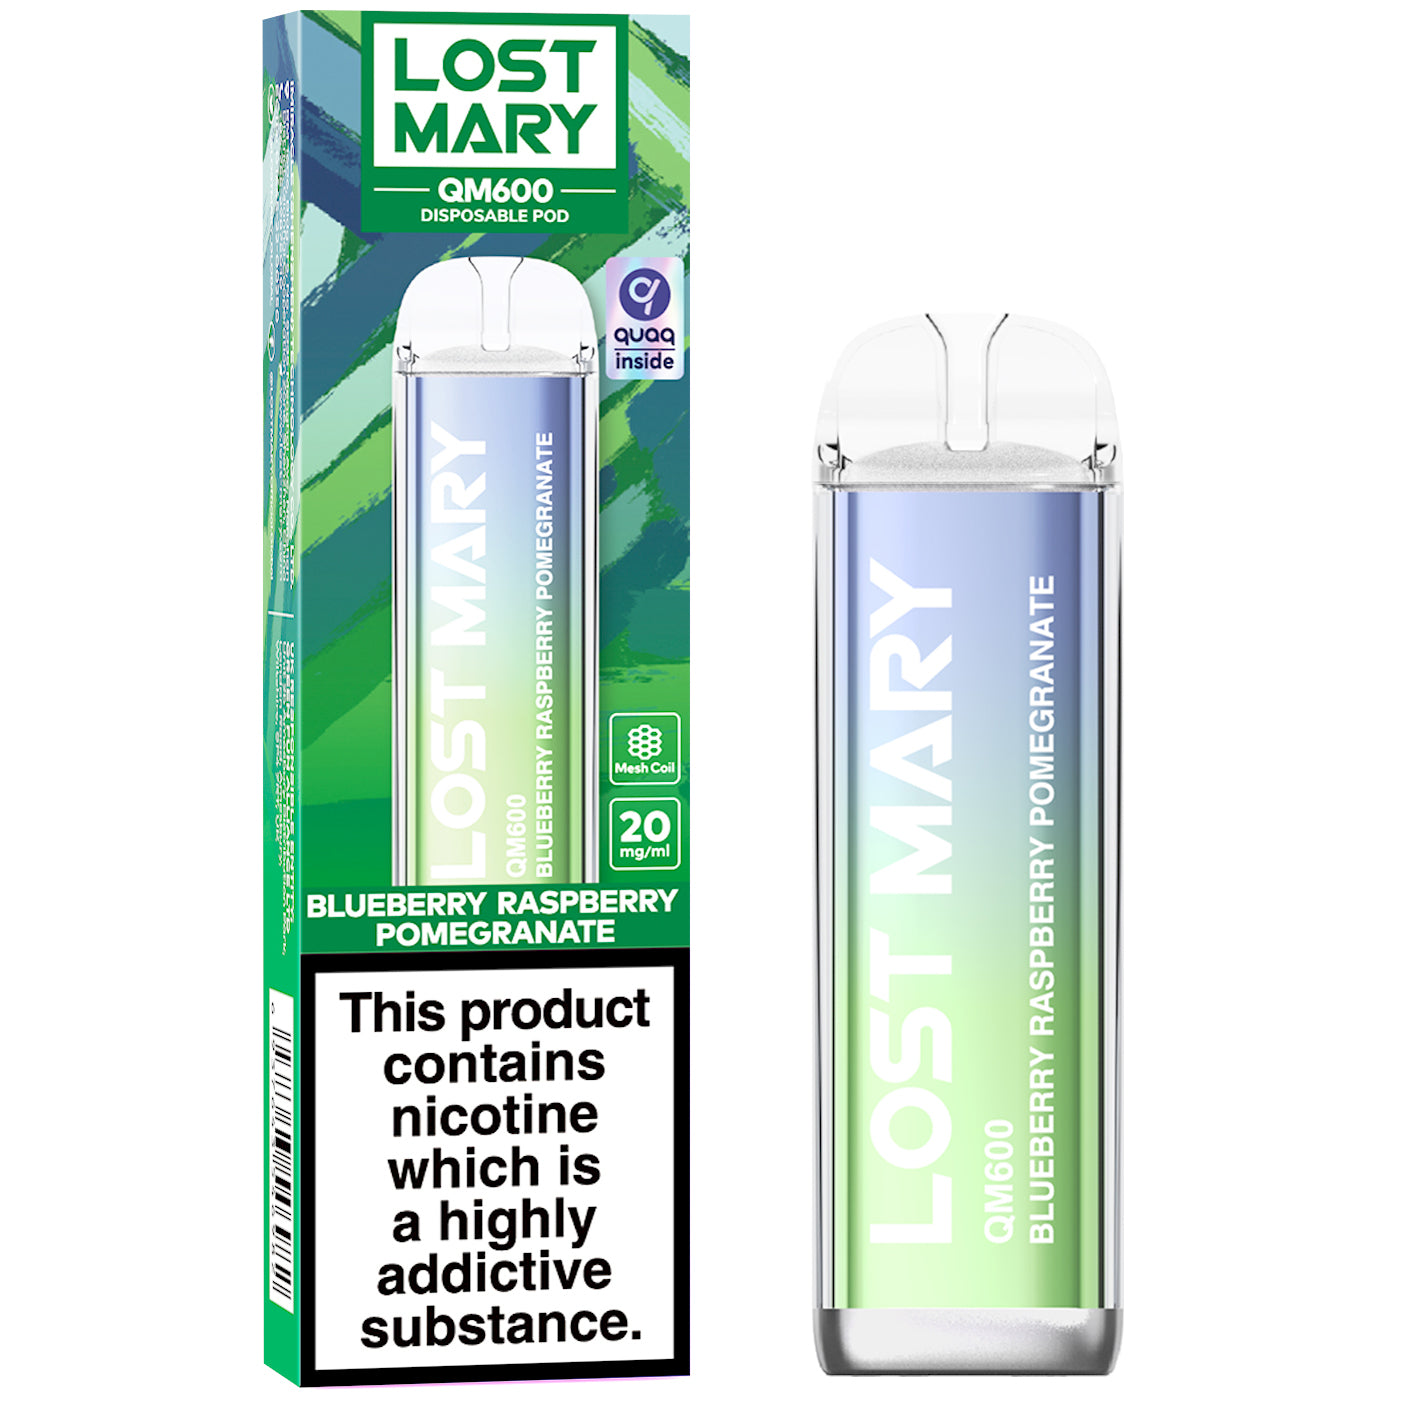 Lost Mary QM600 Blueberry Raspberry Pomegranate Disposable Vape